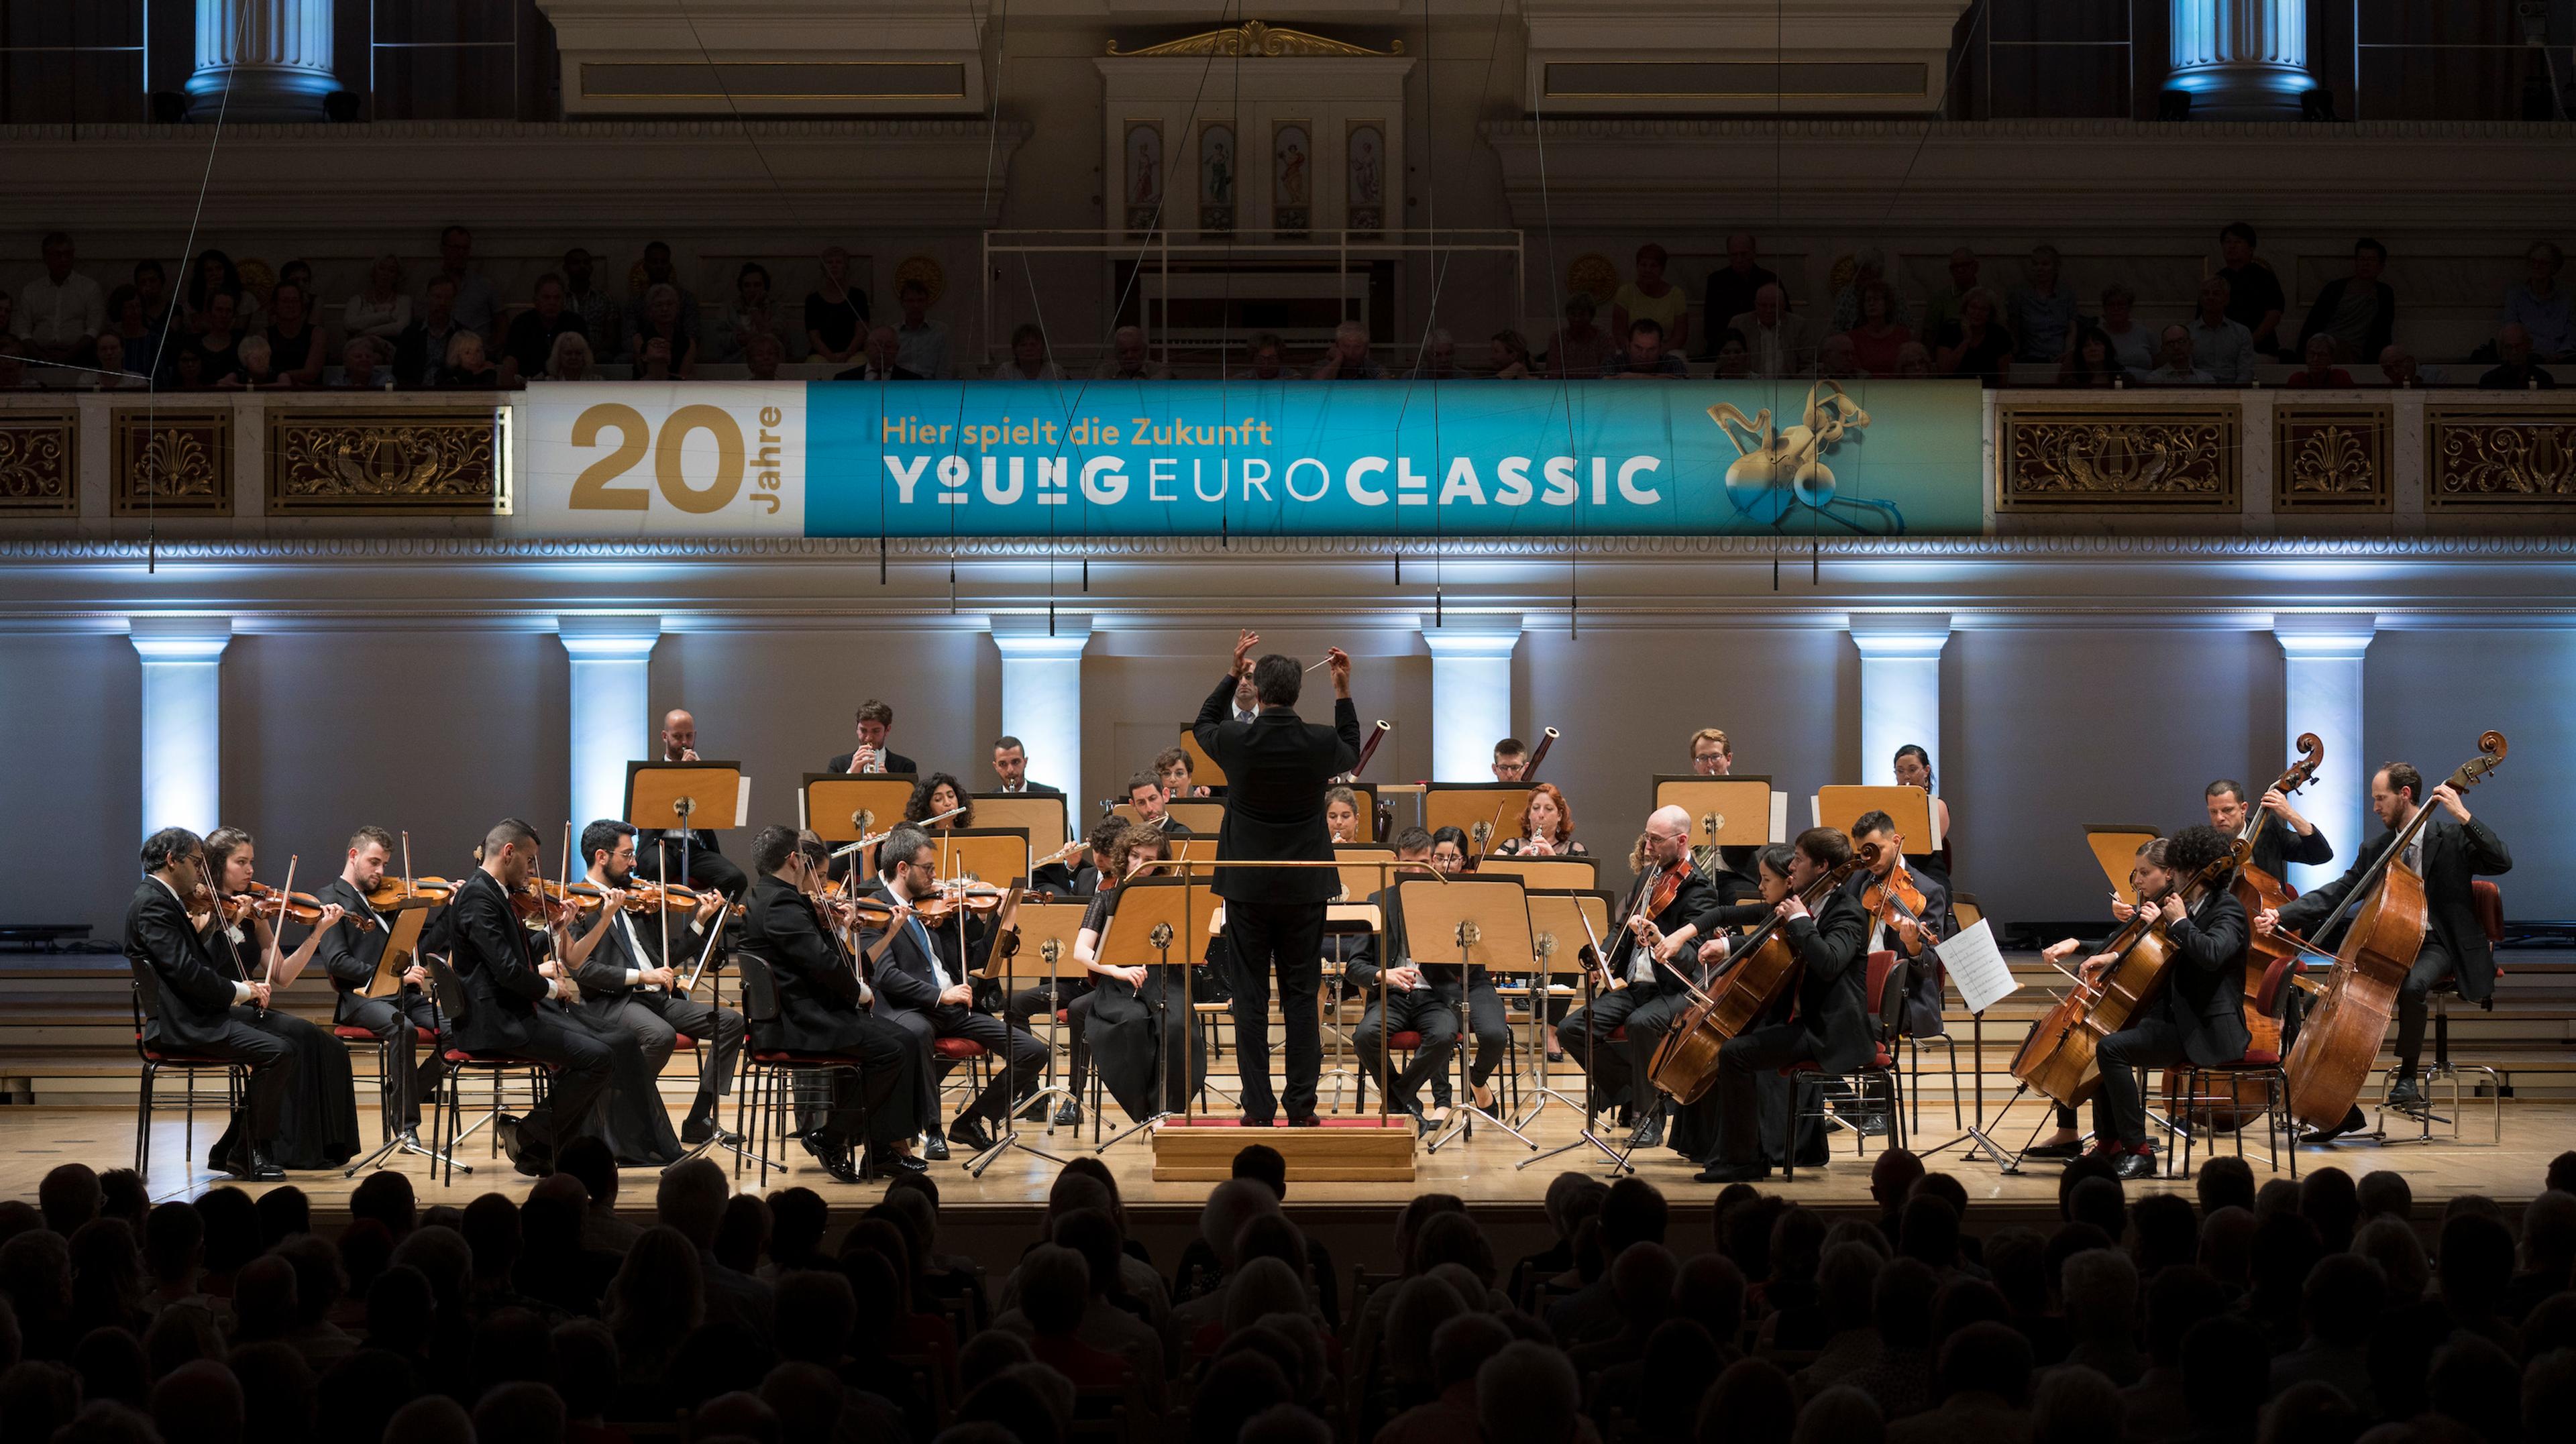 The orchestra performing on stage in Berlin